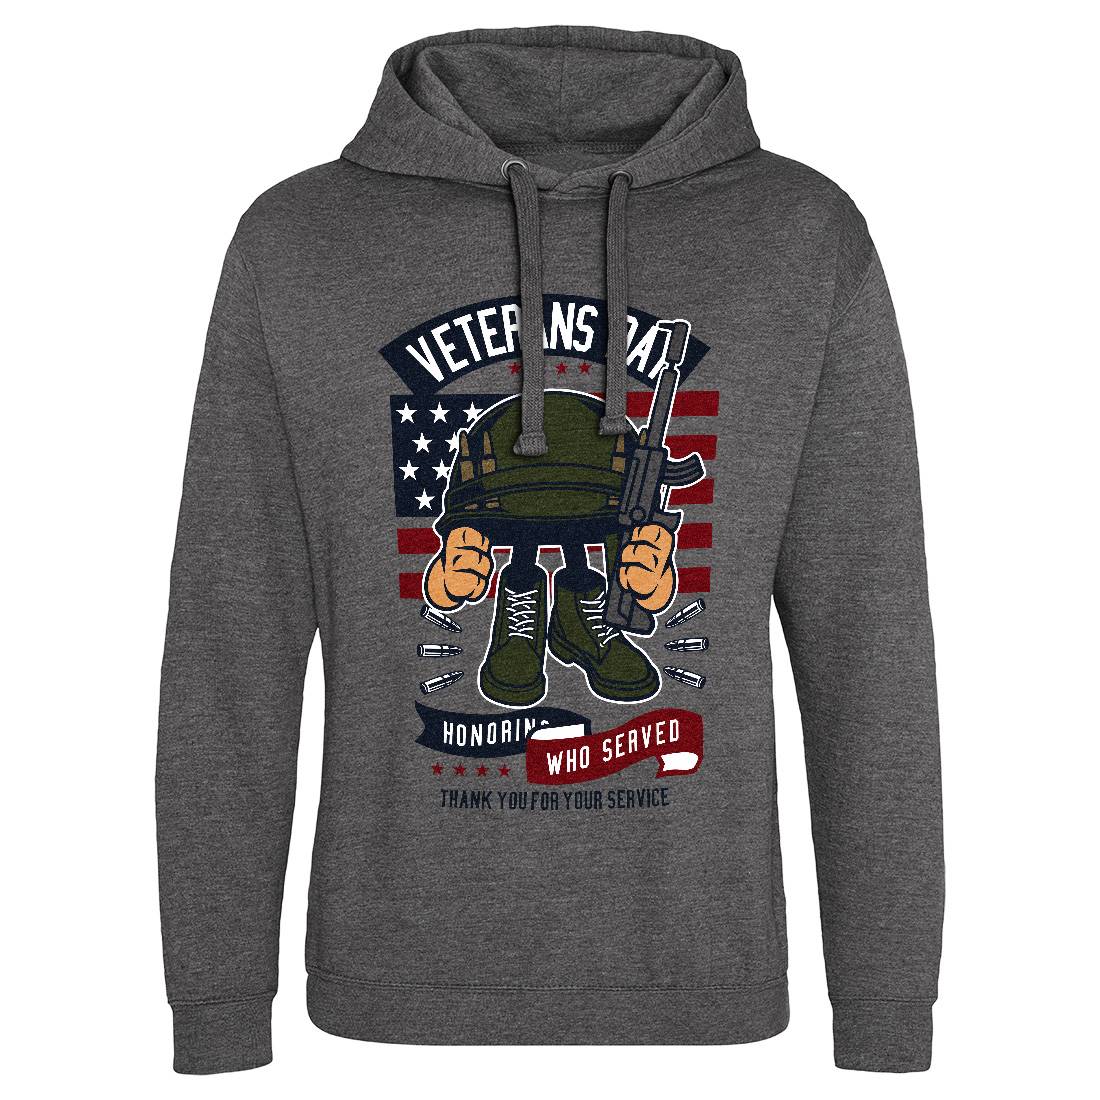 Veterans Day Mens Hoodie Without Pocket Army C686